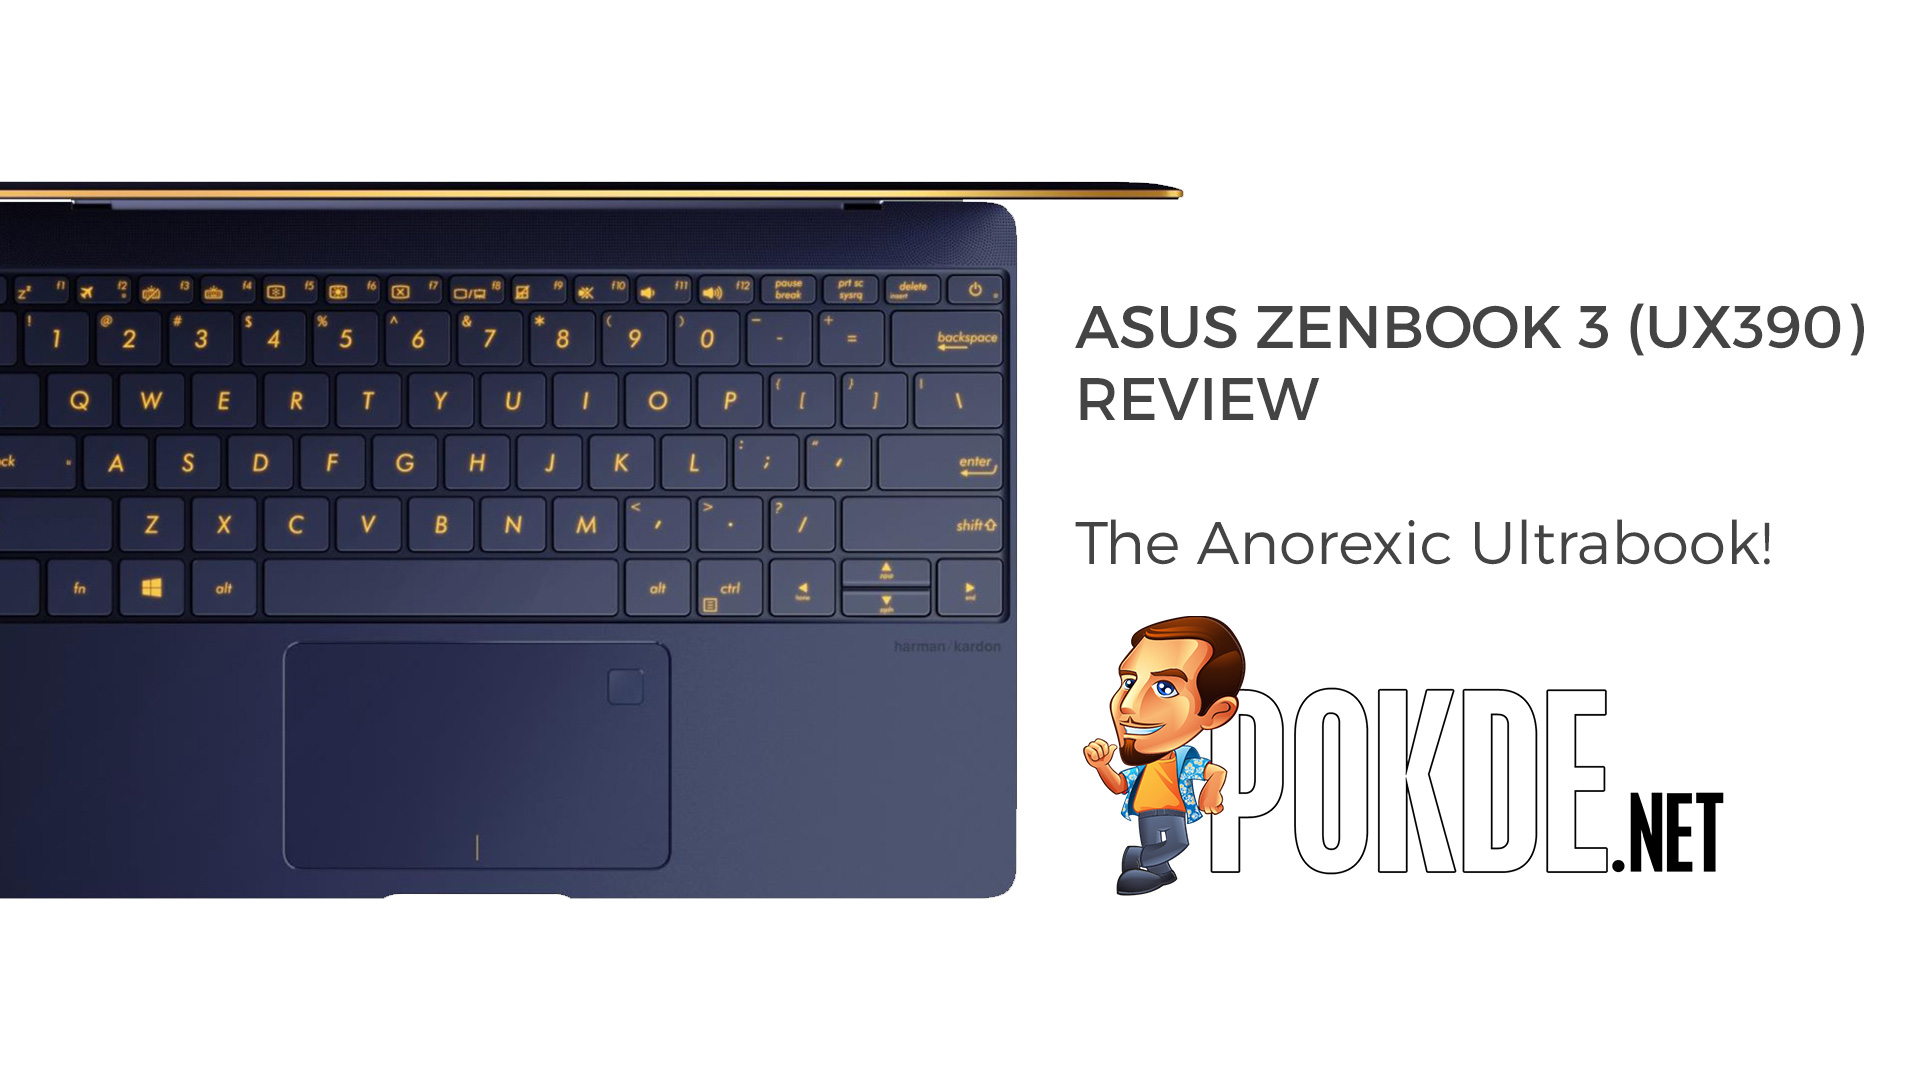 Asus ZenBook 3 (UX390) Review - The Anorexic Ultrabook 32